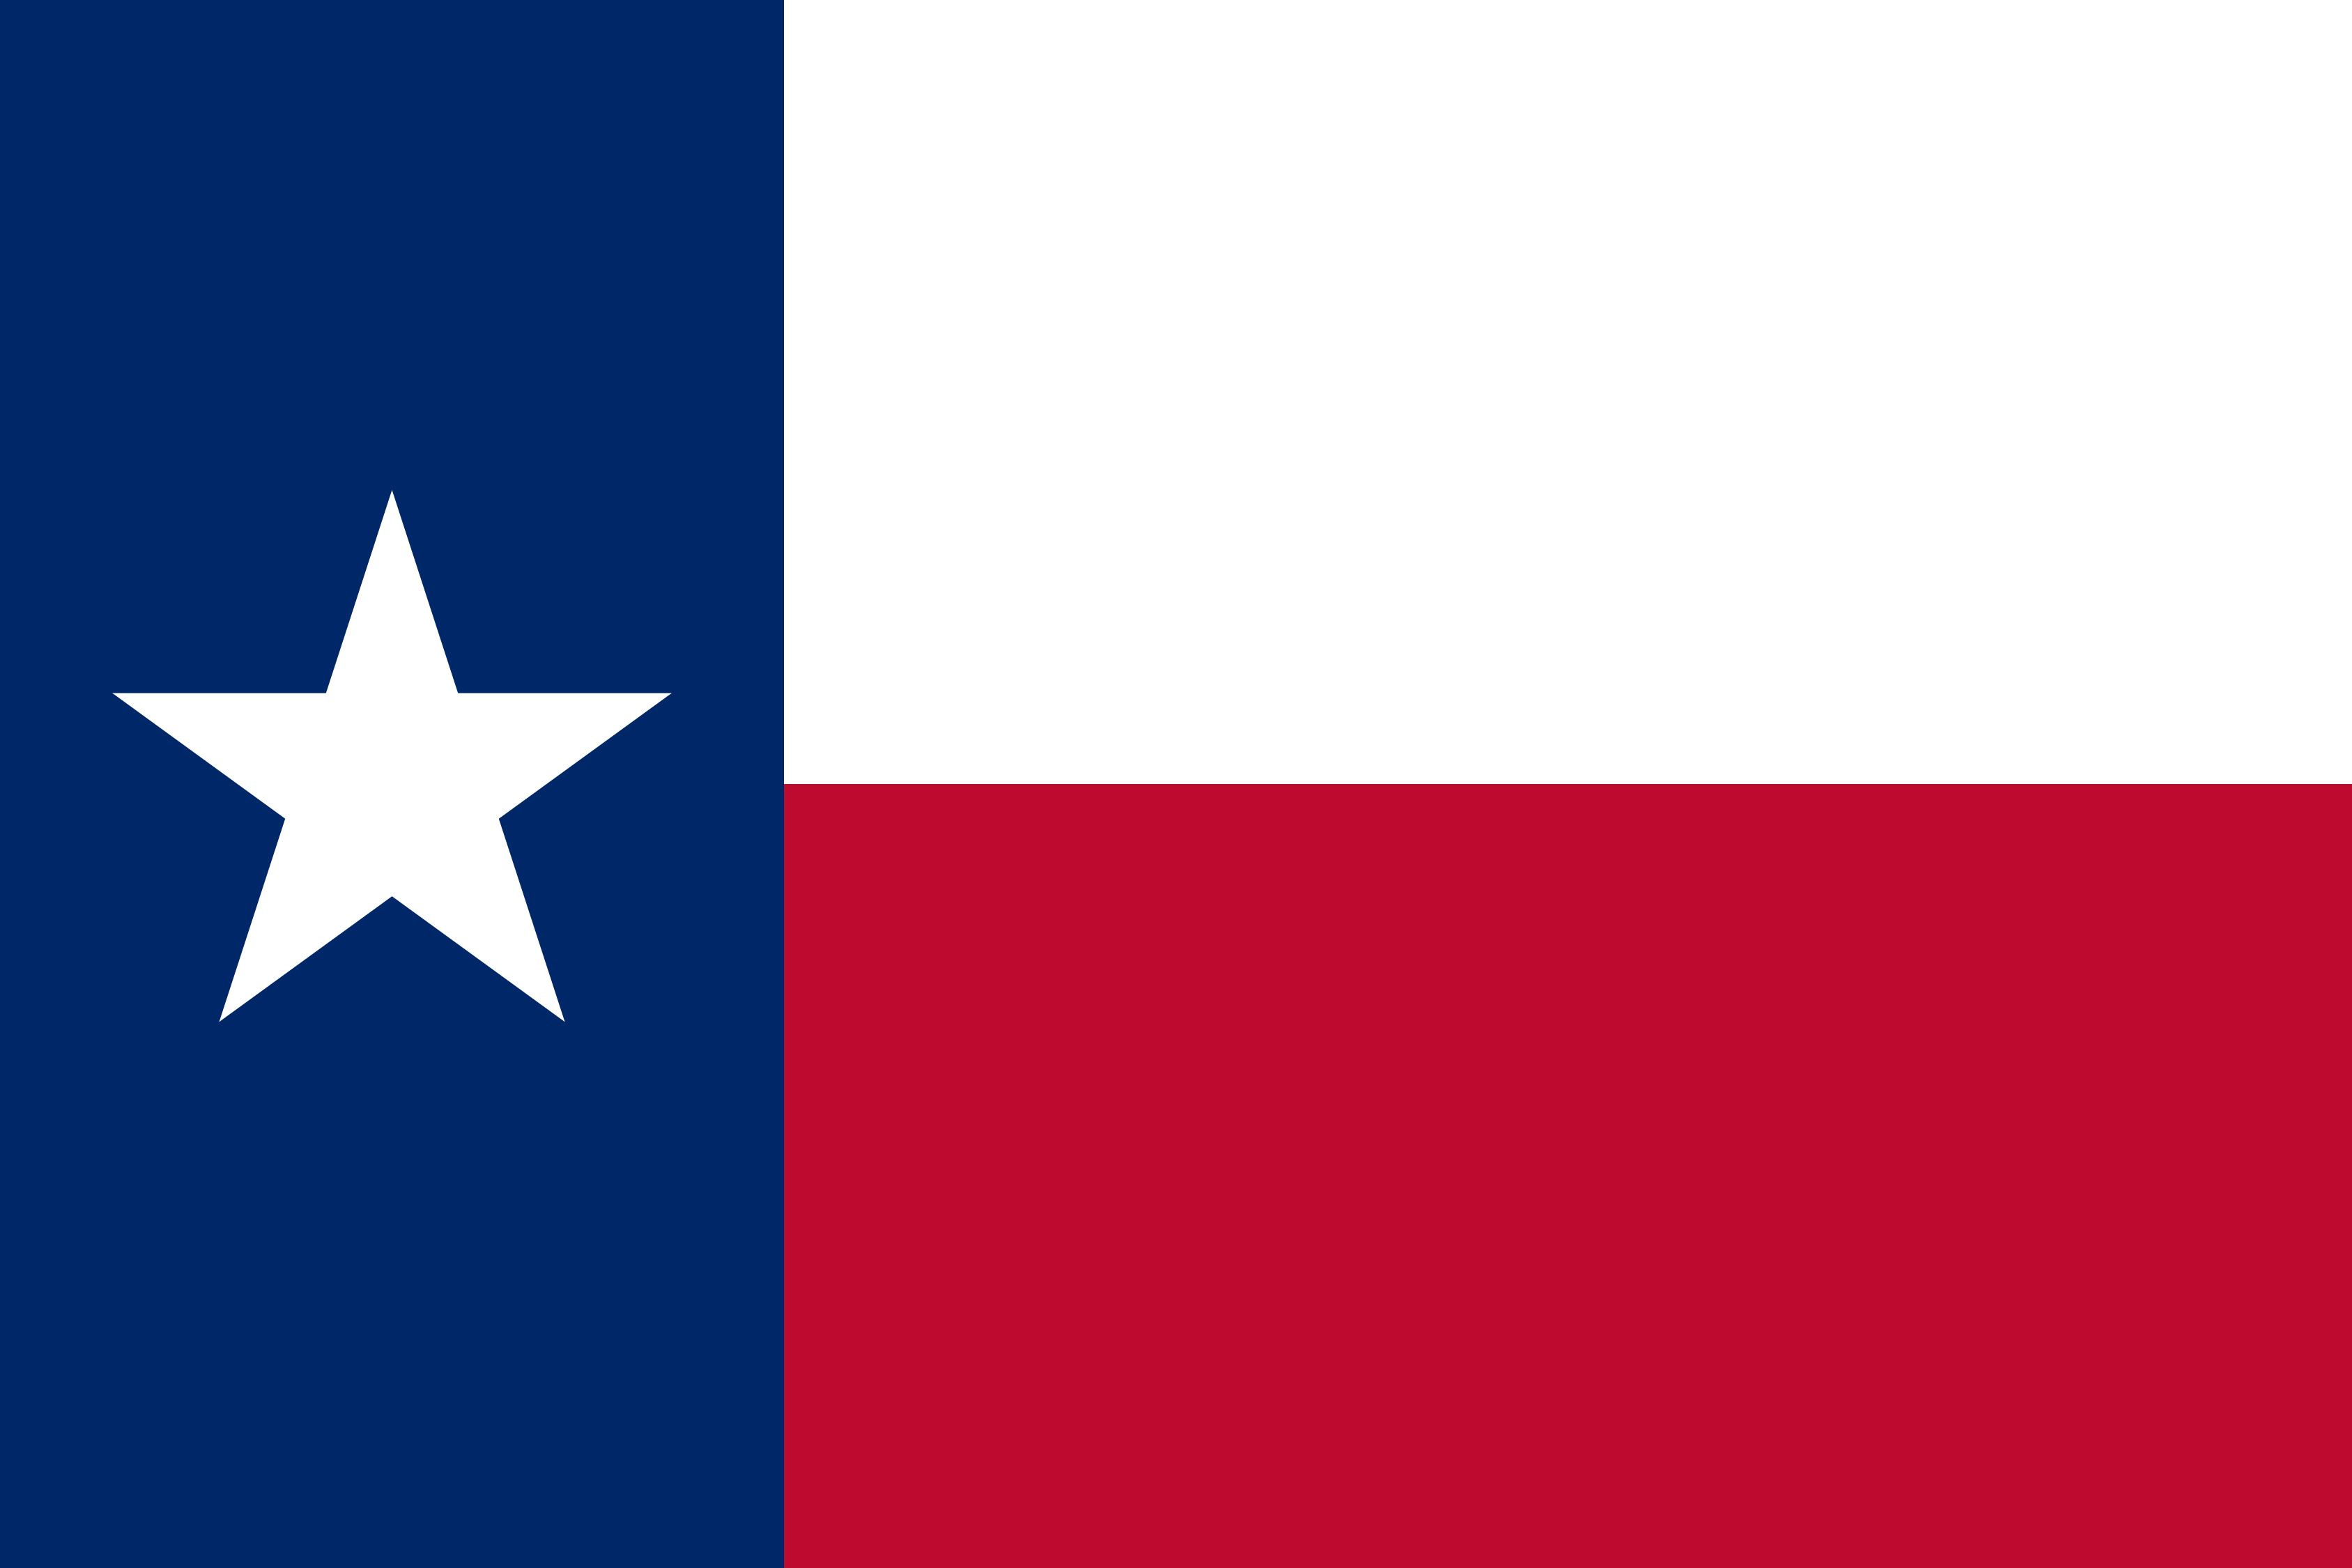 Free Texas Flag Images: AI, EPS, GIF, JPG, PDF, PNG, SVG and more!